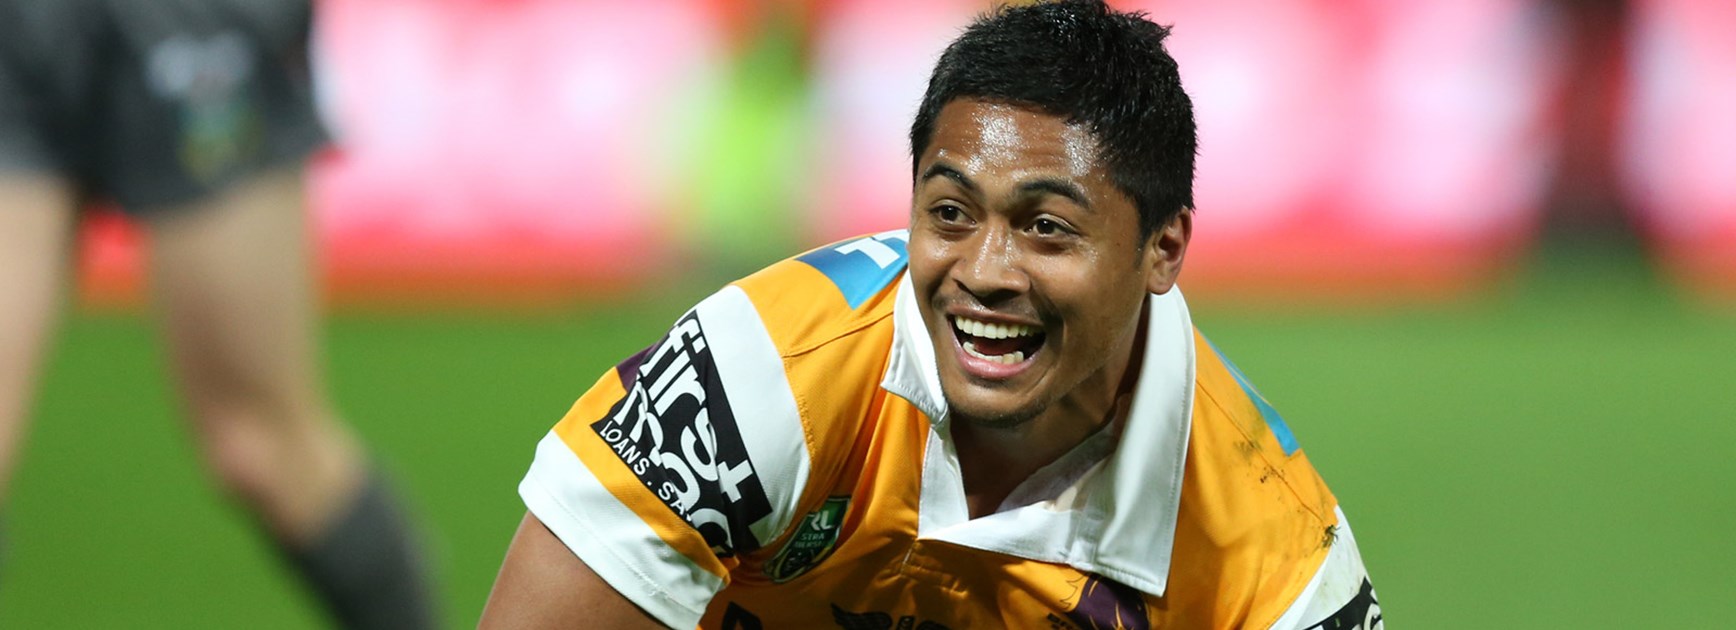 Anthony Milford starred in the Broncos' preliminary final win over the Roosters.